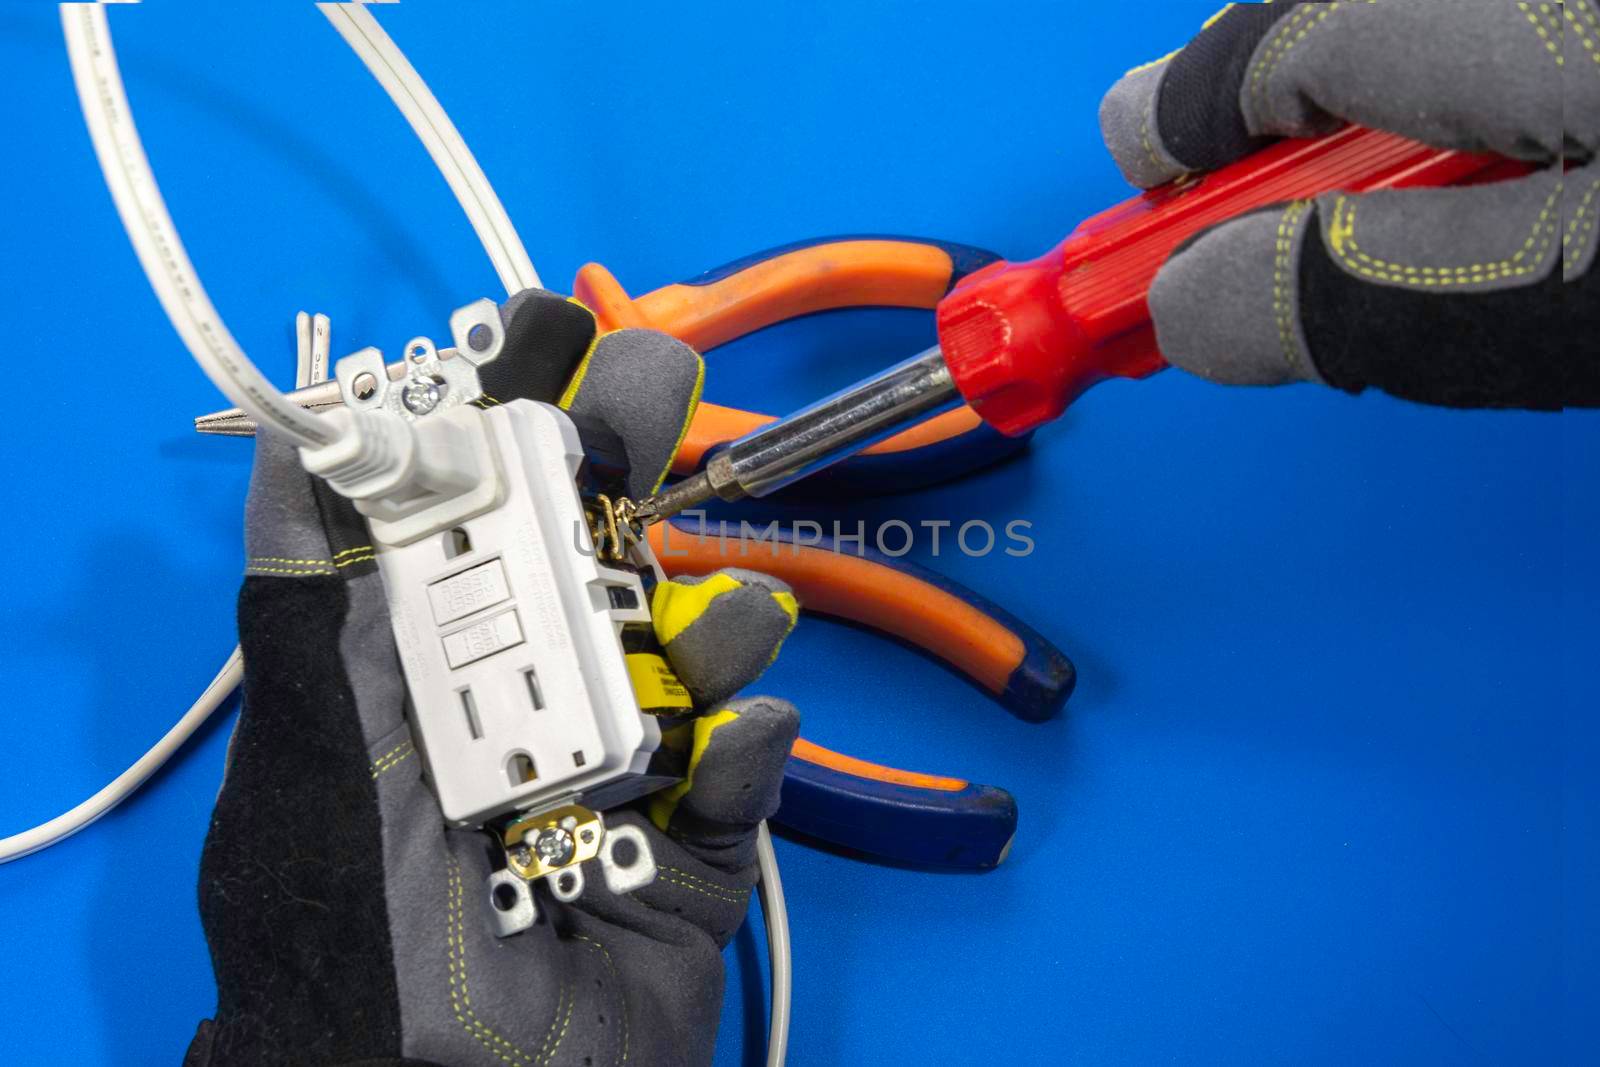 An electrician fixes a screw on an electrical outlet with a screwdriver by ben44